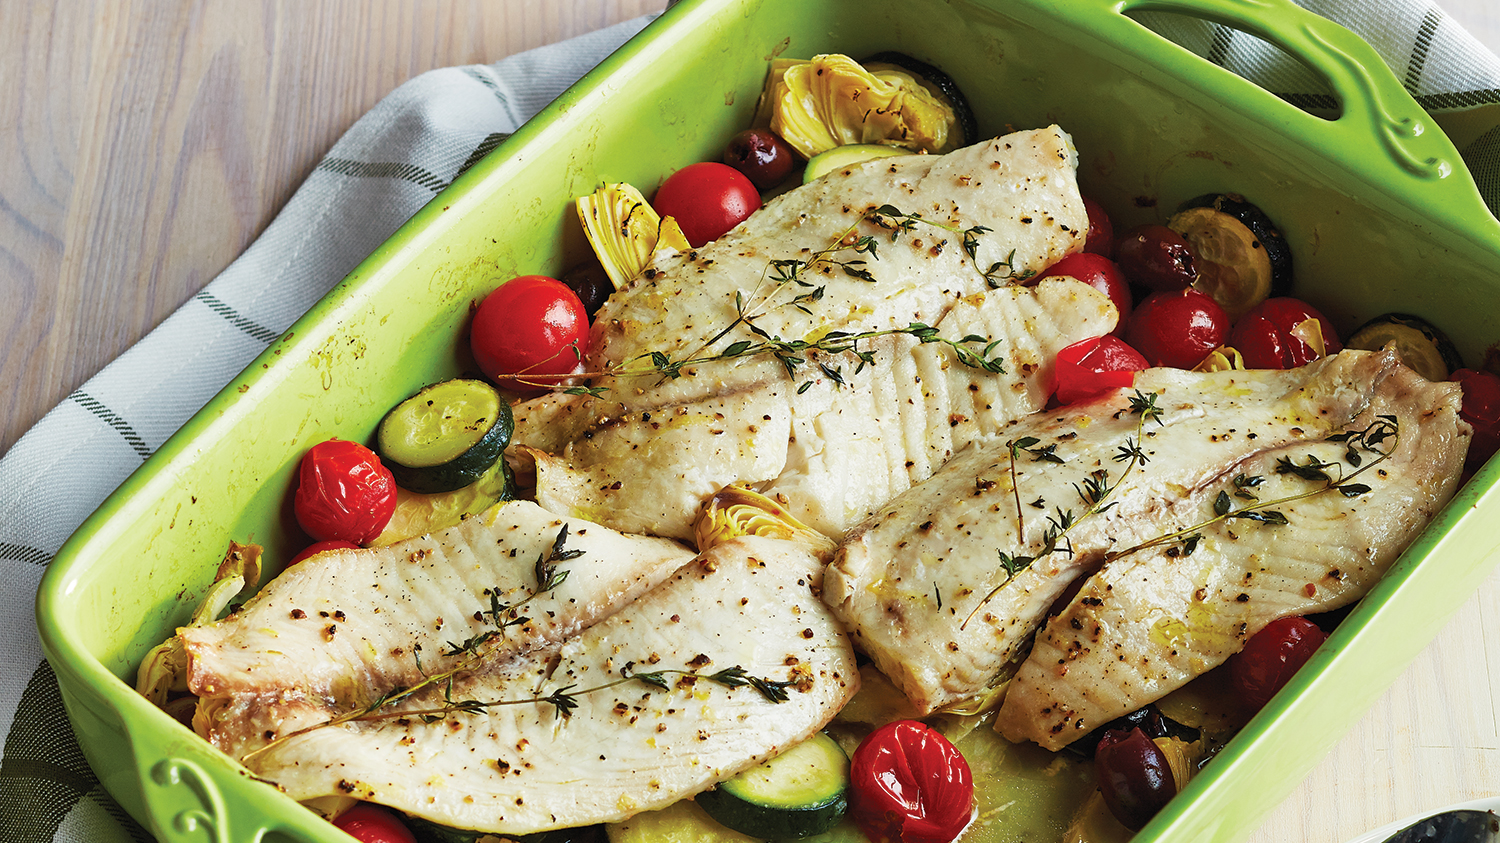 Read more about Roast Fish and Mediterranean-Style Vegetables